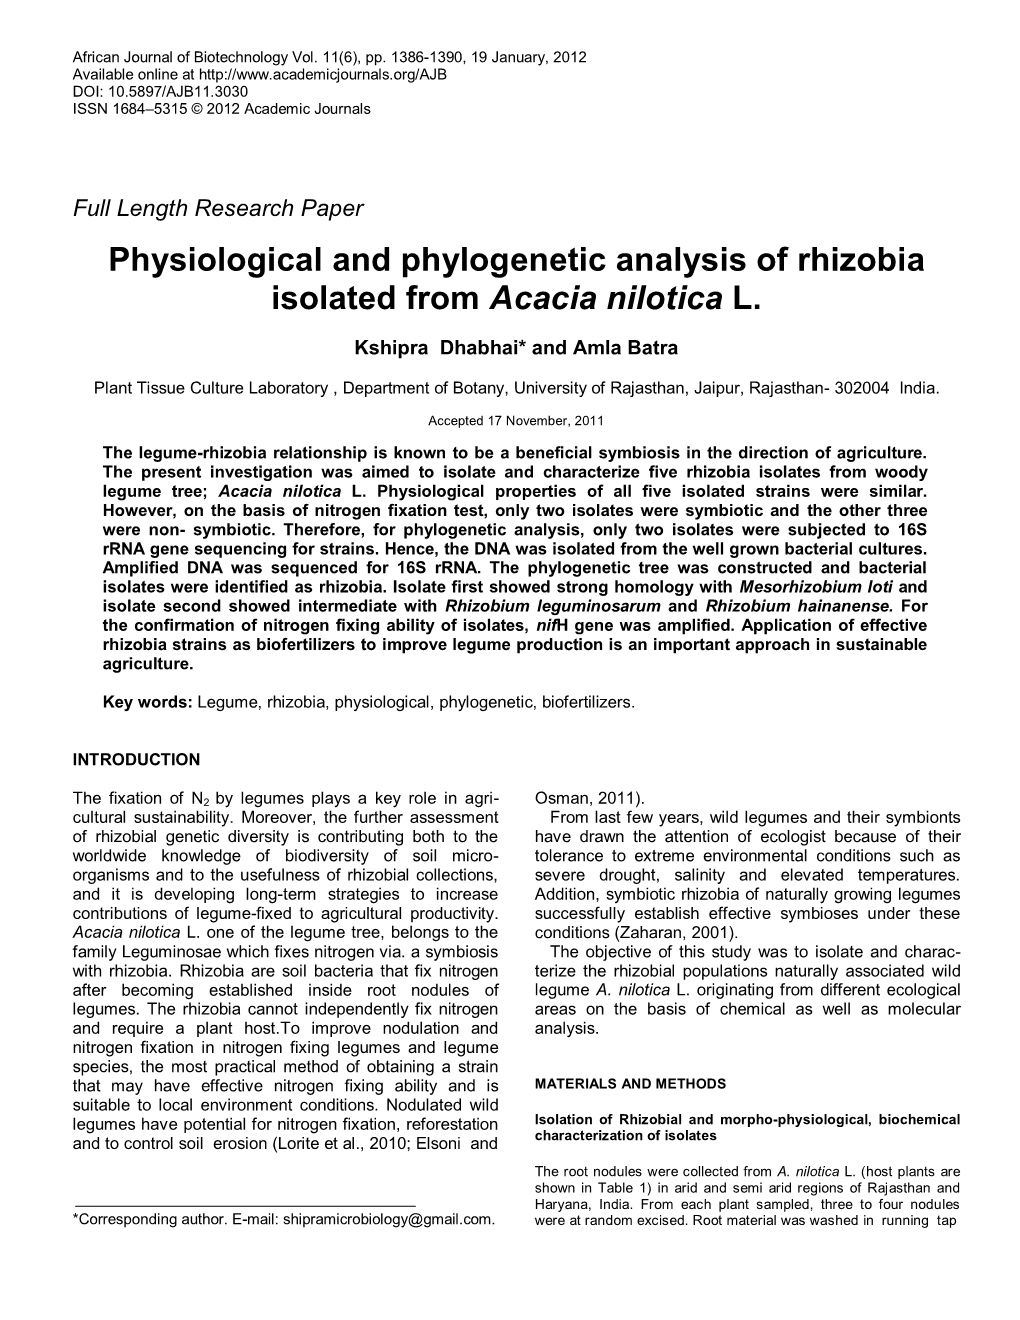 Physiological and Phylogenetic Analysis of Rhizobia Isolated from Acacia Nilotica L